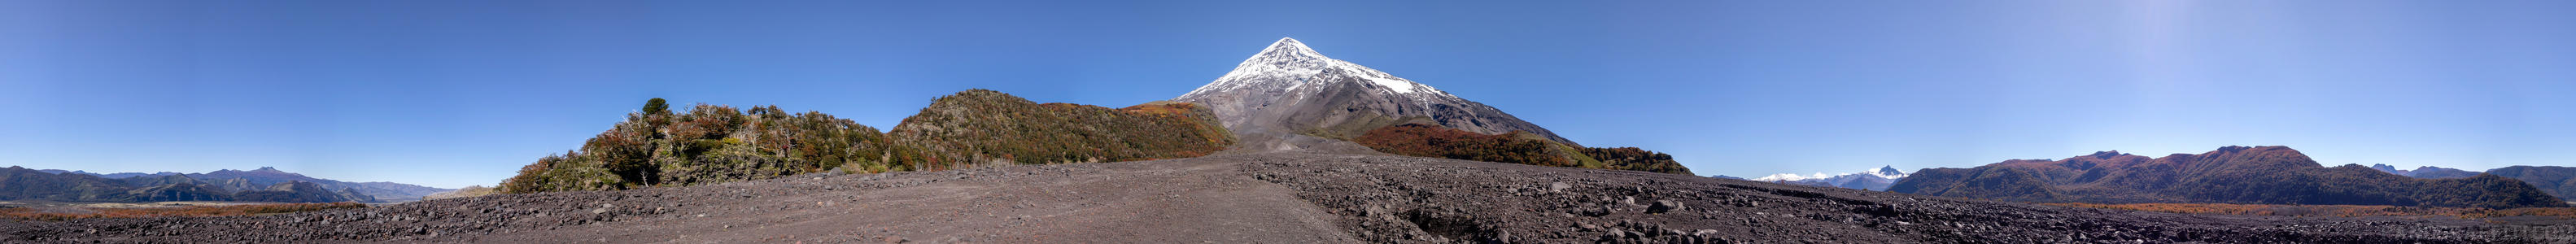 Base of Volcano Lanin in 360 - A full 360 degree view of the walk up to the base of Volcano Lanin